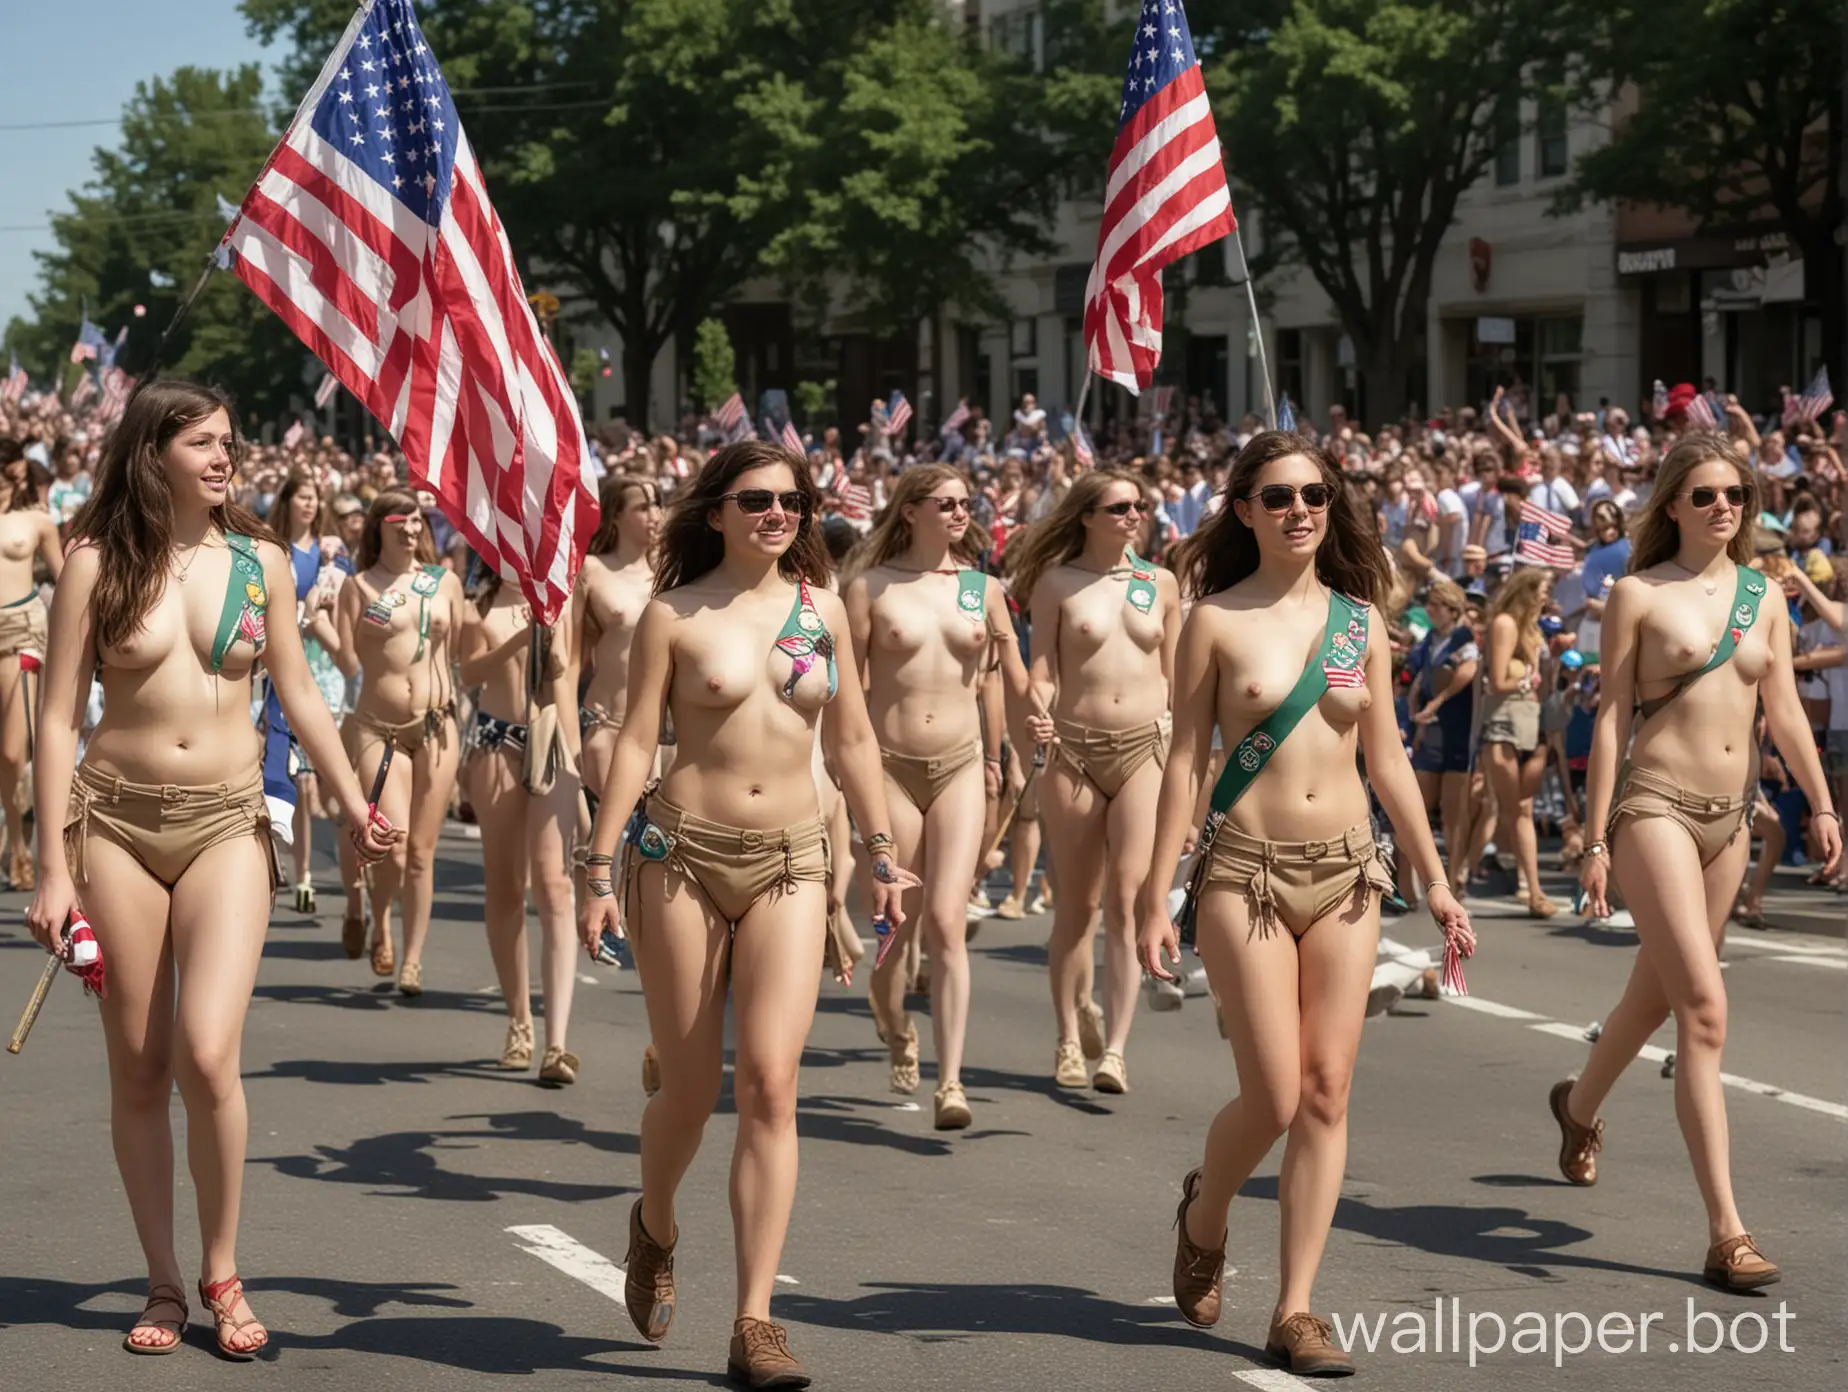 Nude girl scout troop marching in a patriotic parade.  The leader is holding a USA flag